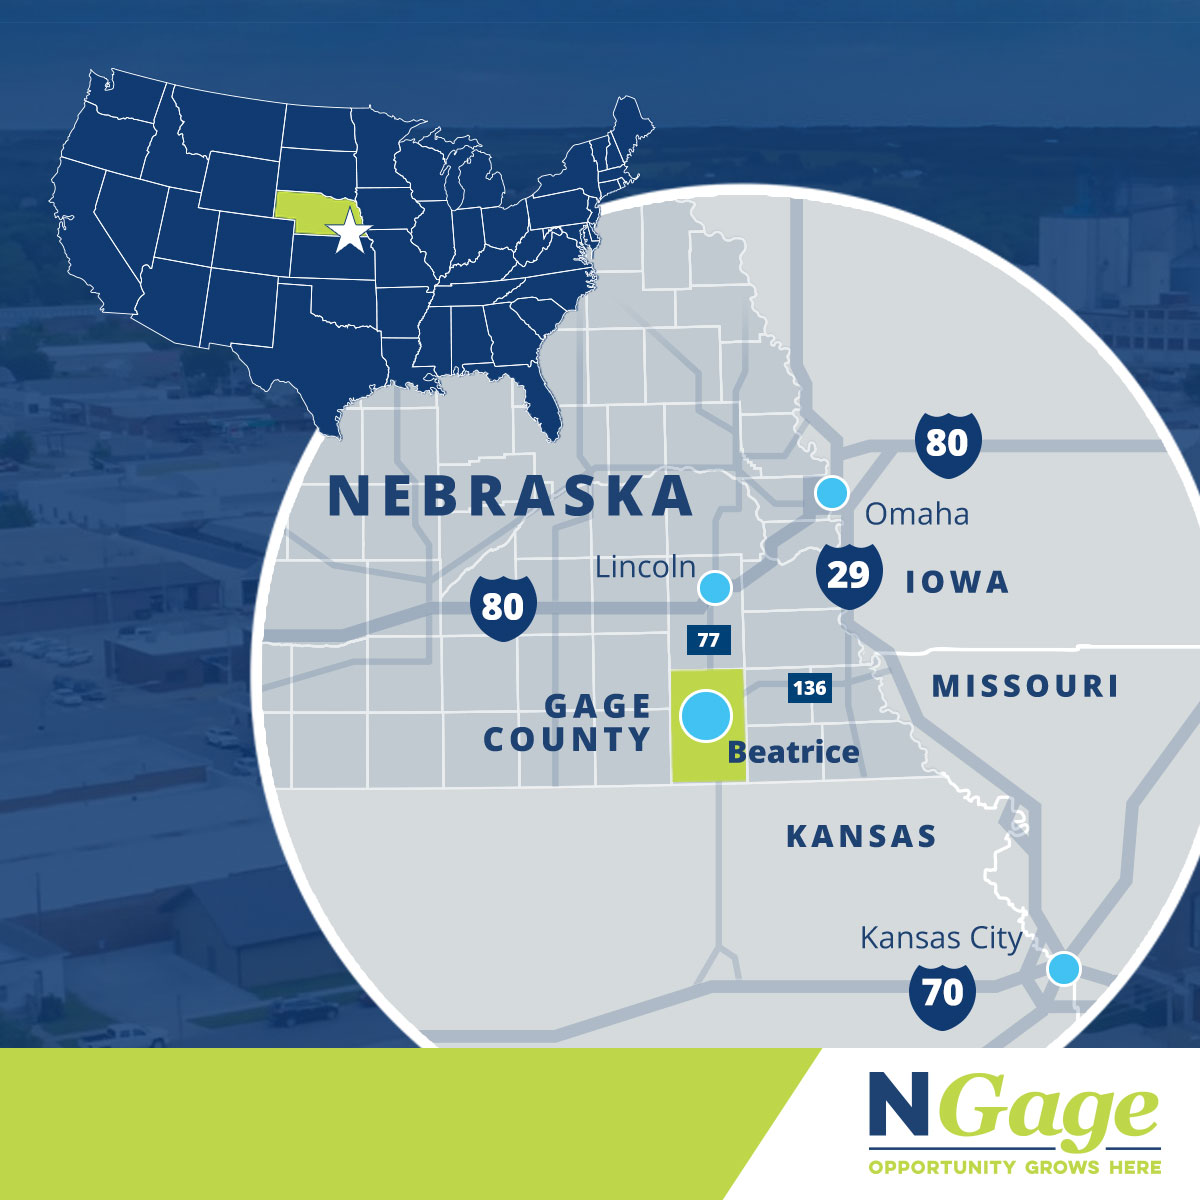 Where is Gage County? Photo